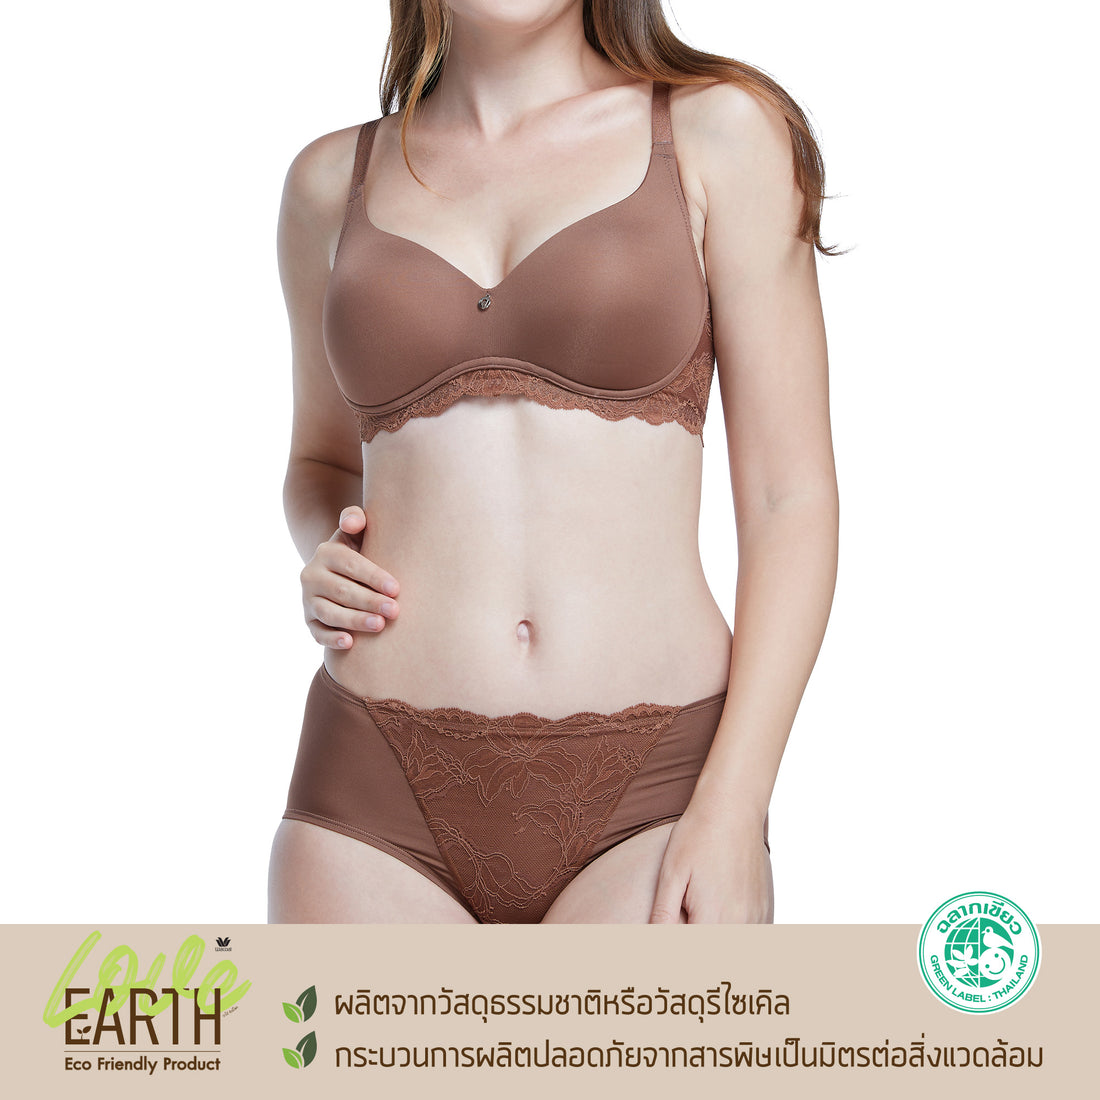 Wacoal Curve Diva compression bra for large cup girls, model WB7543/WQ1535, brown (BR)